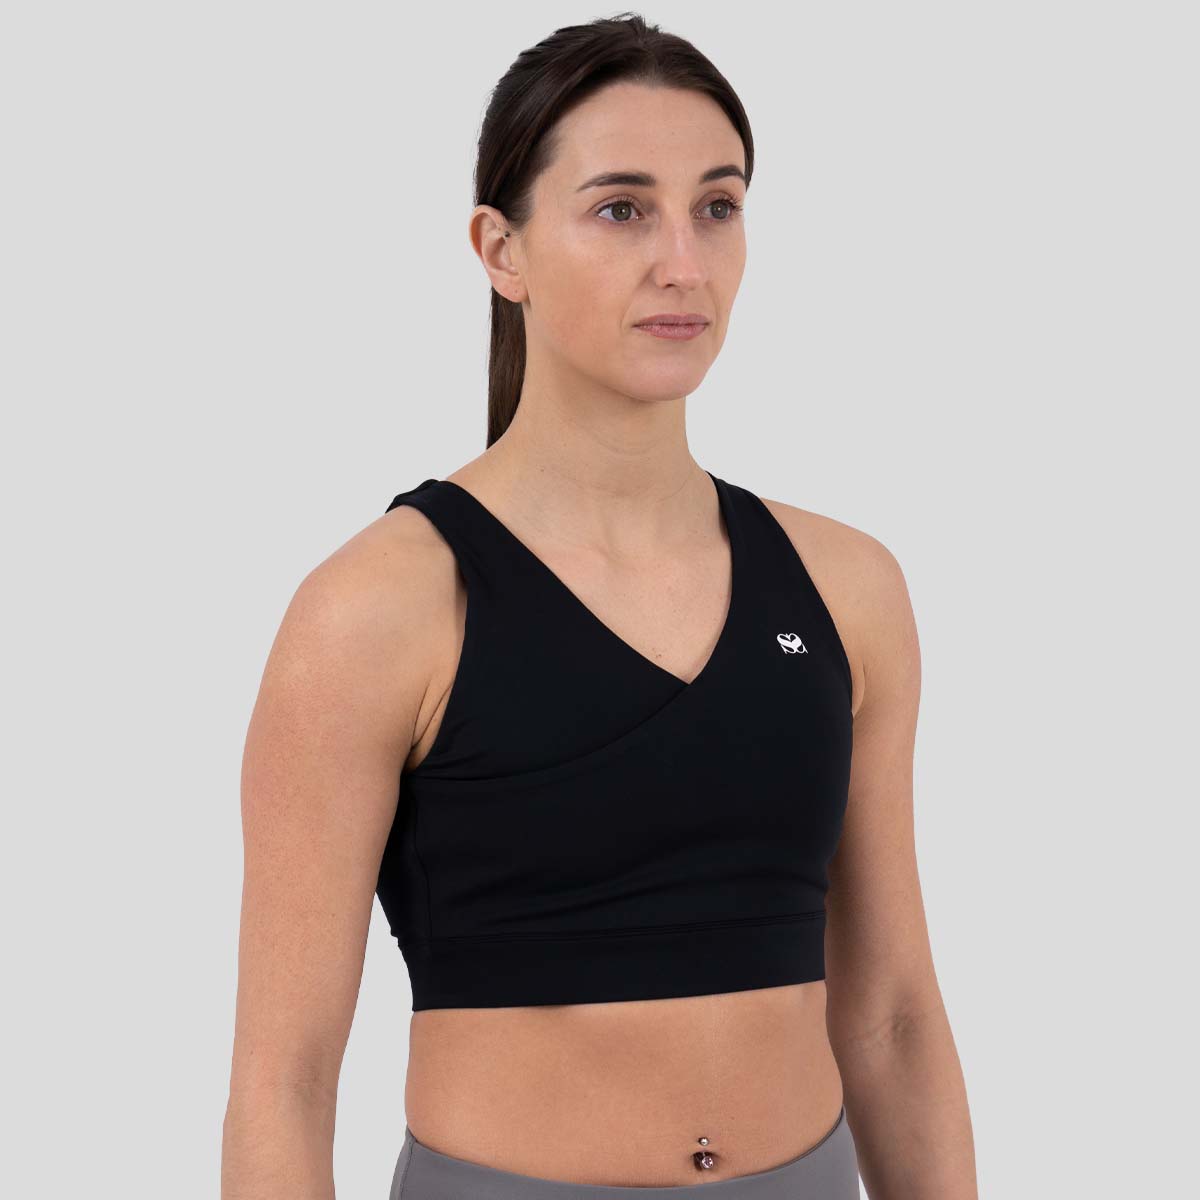 Sports Bras from Made4Fighters